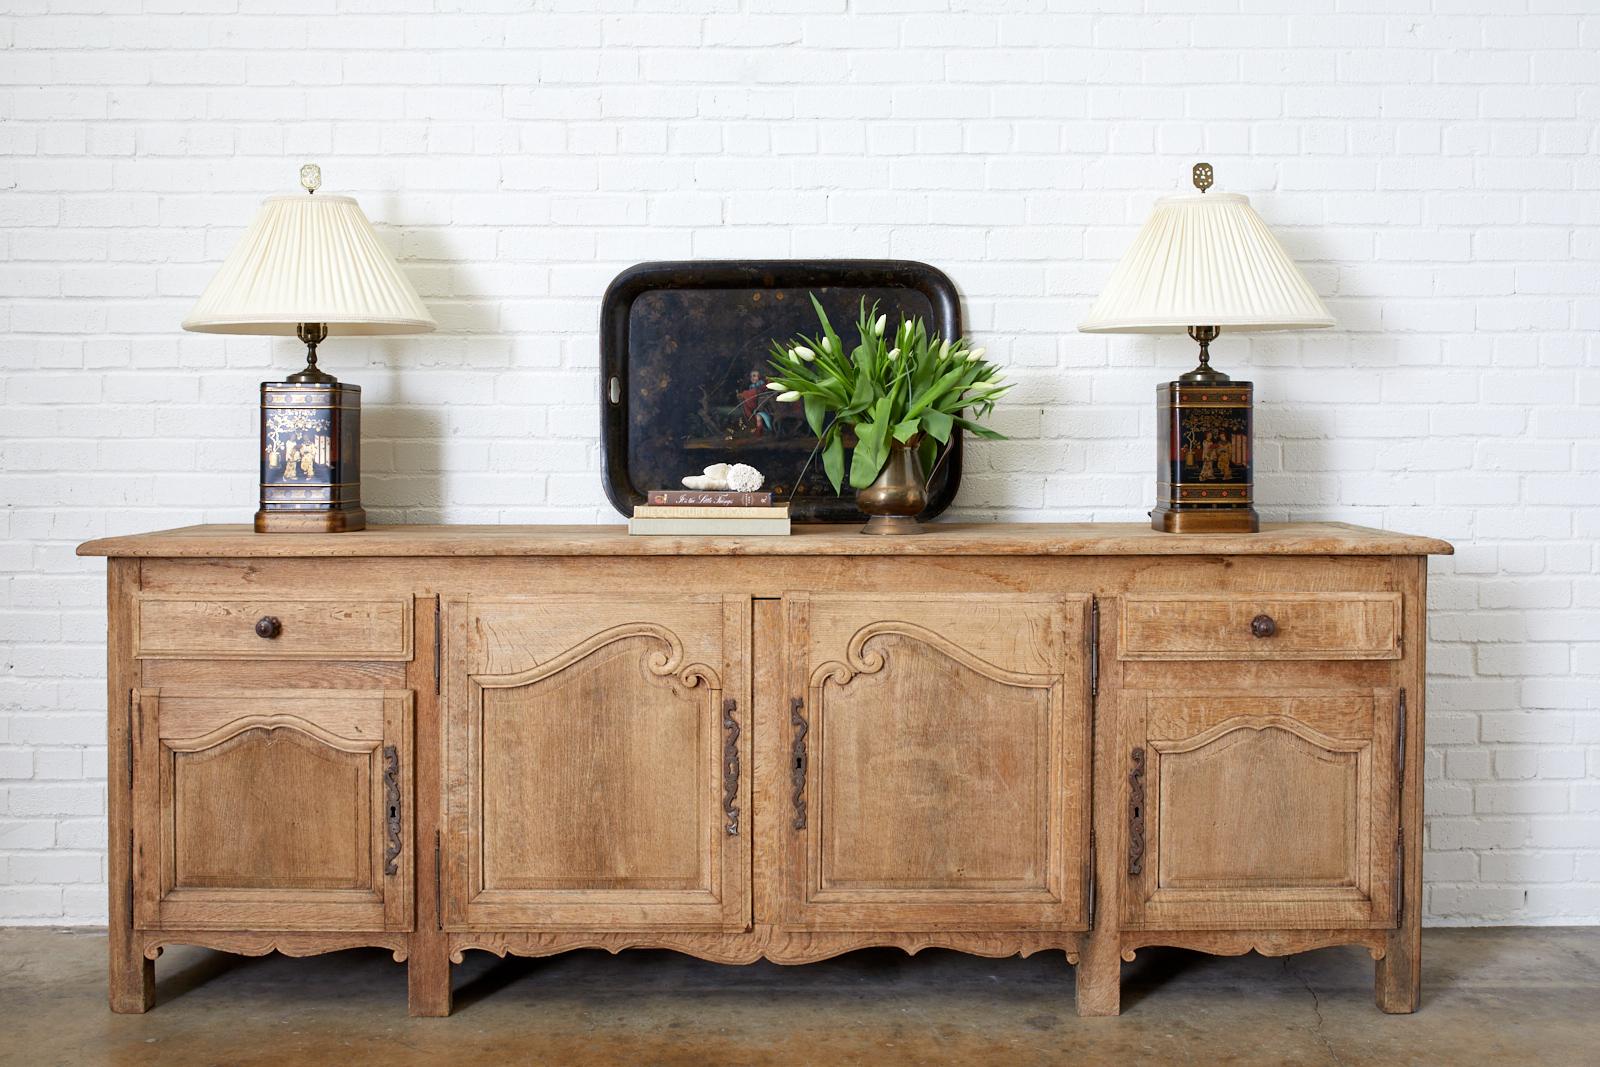 Rustic 19th century sideboard, enfilade, or buffet made in the French Provincial style. Features a bleached oak finish with a beautifully aged patina on the oak which showcases the lovely wood grain. Period correct brass hardware and lock plates